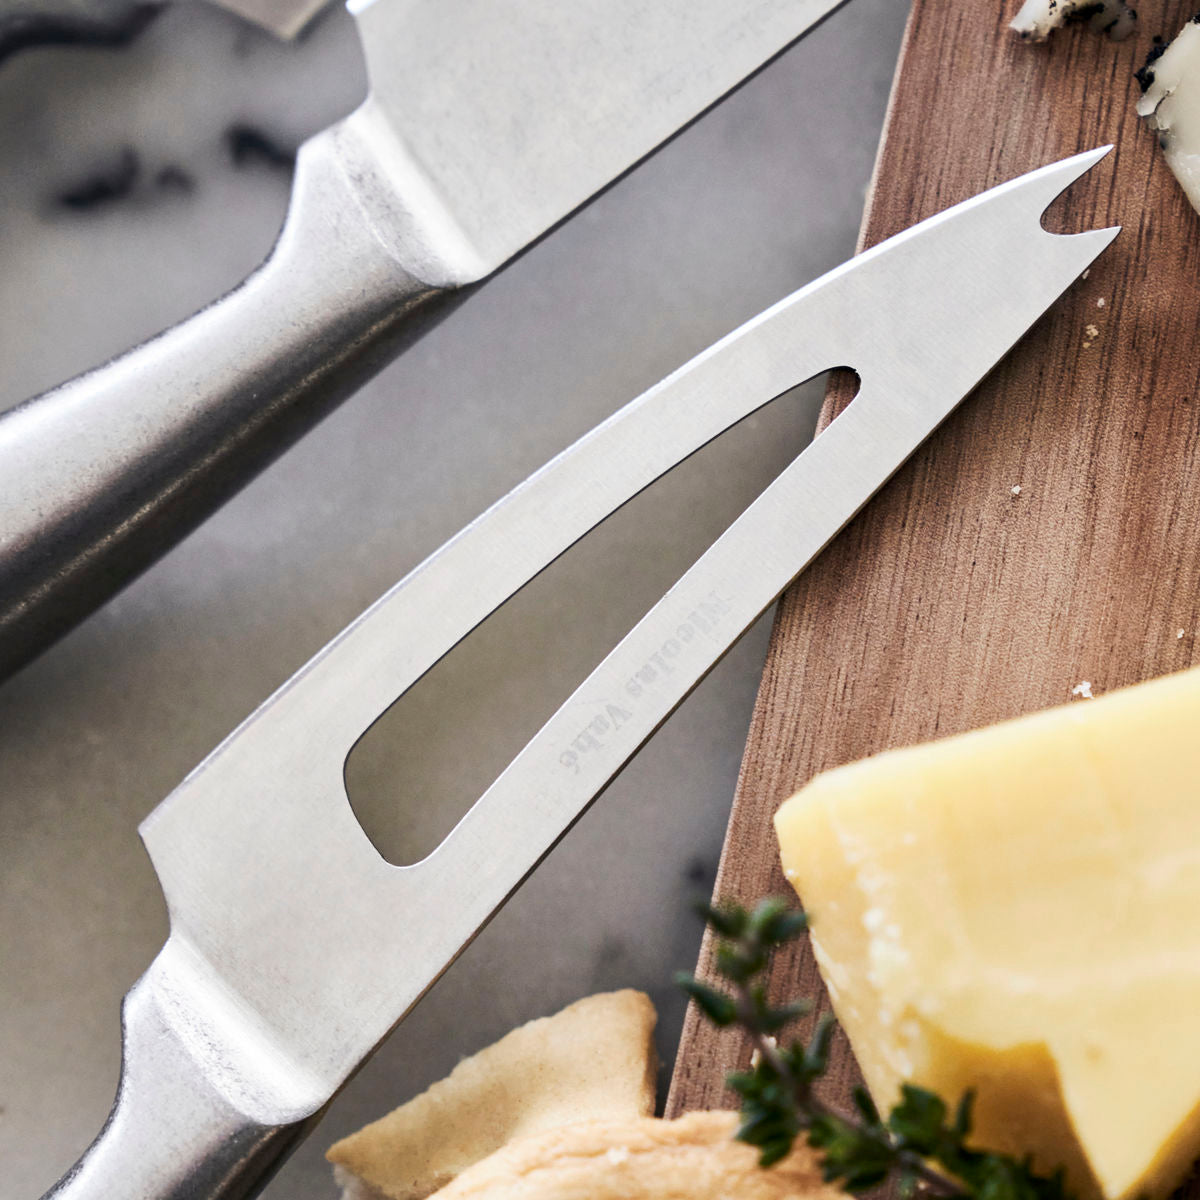 Society of Lifestyle Boxed set of Cheese knives, Fromage Stainless Steel